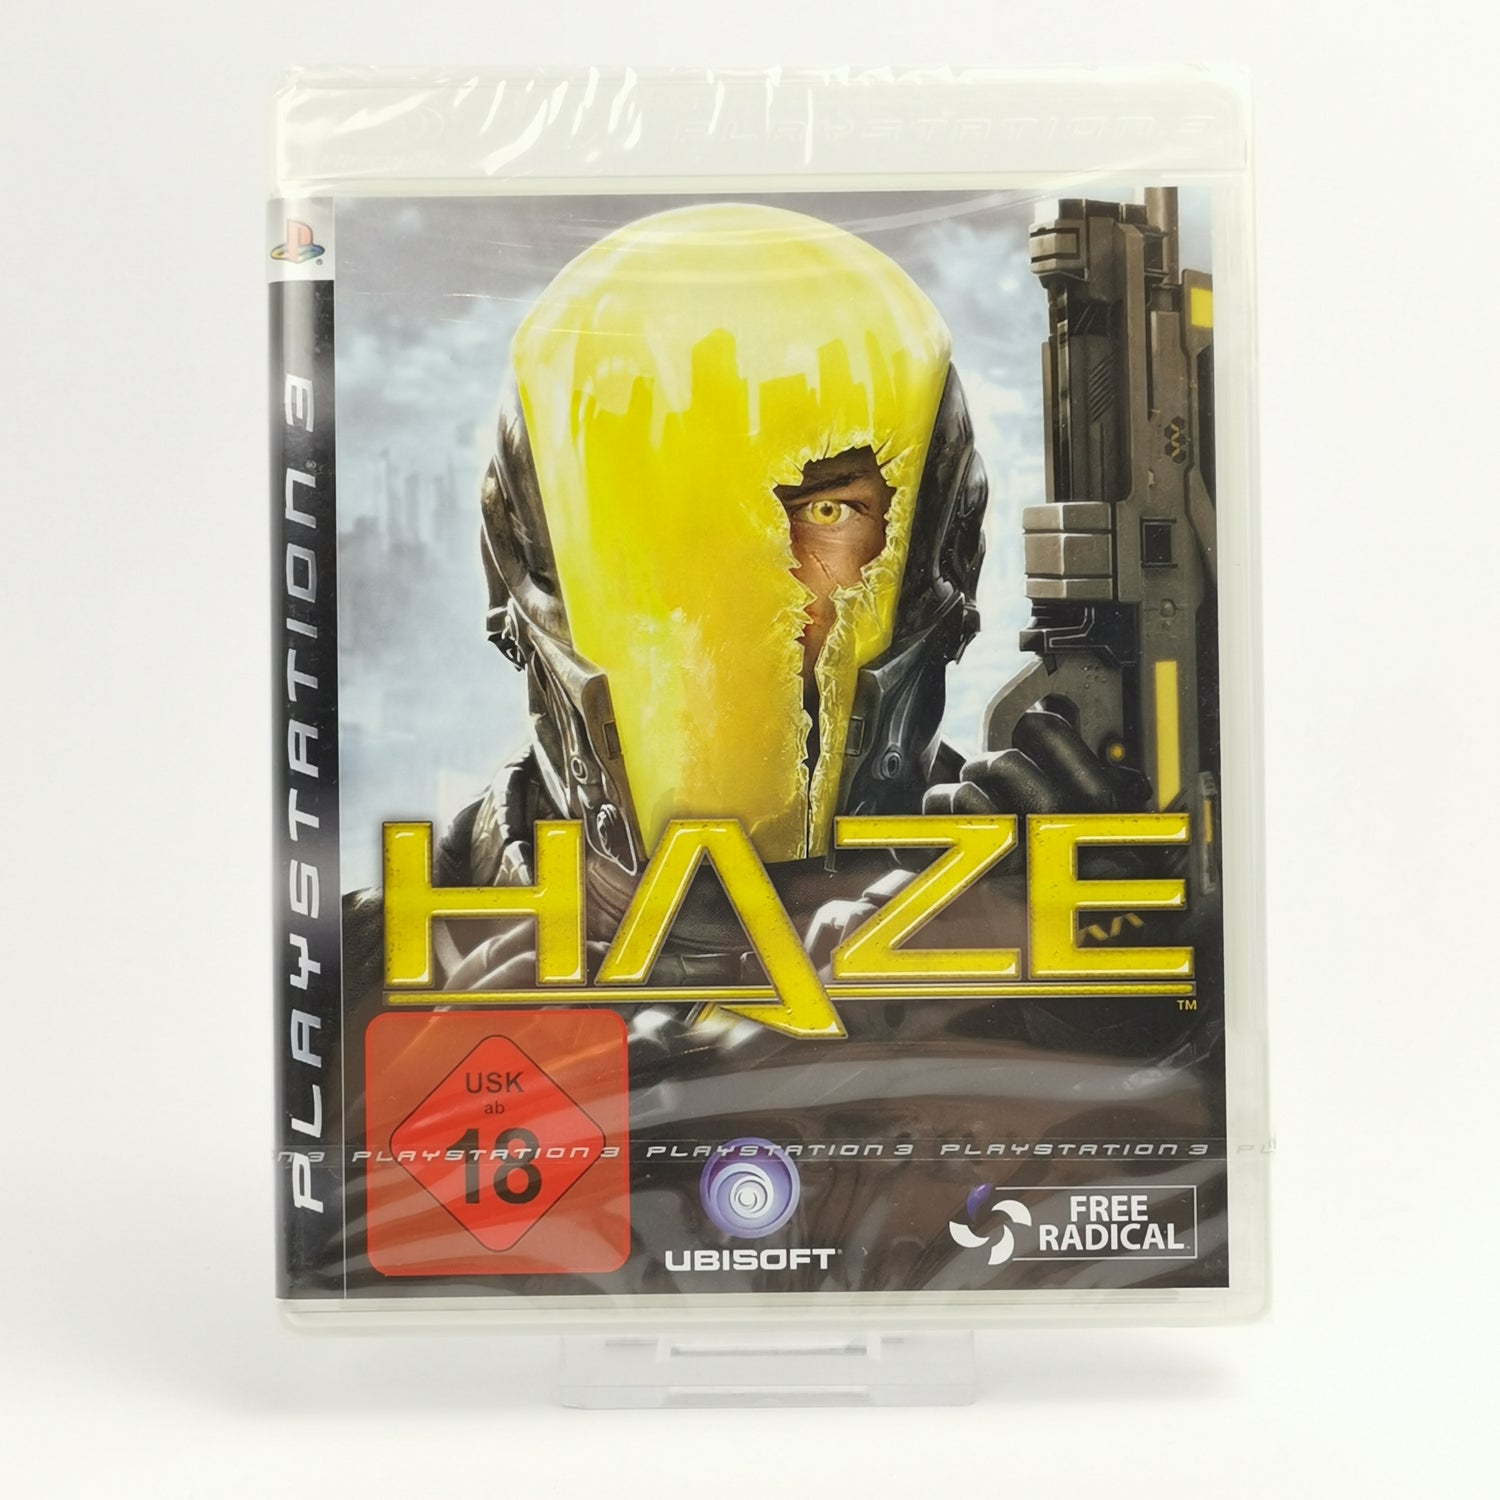 Sony Playstation 3 Game : Haze | PS3 Game - USK18 NEW SEALED